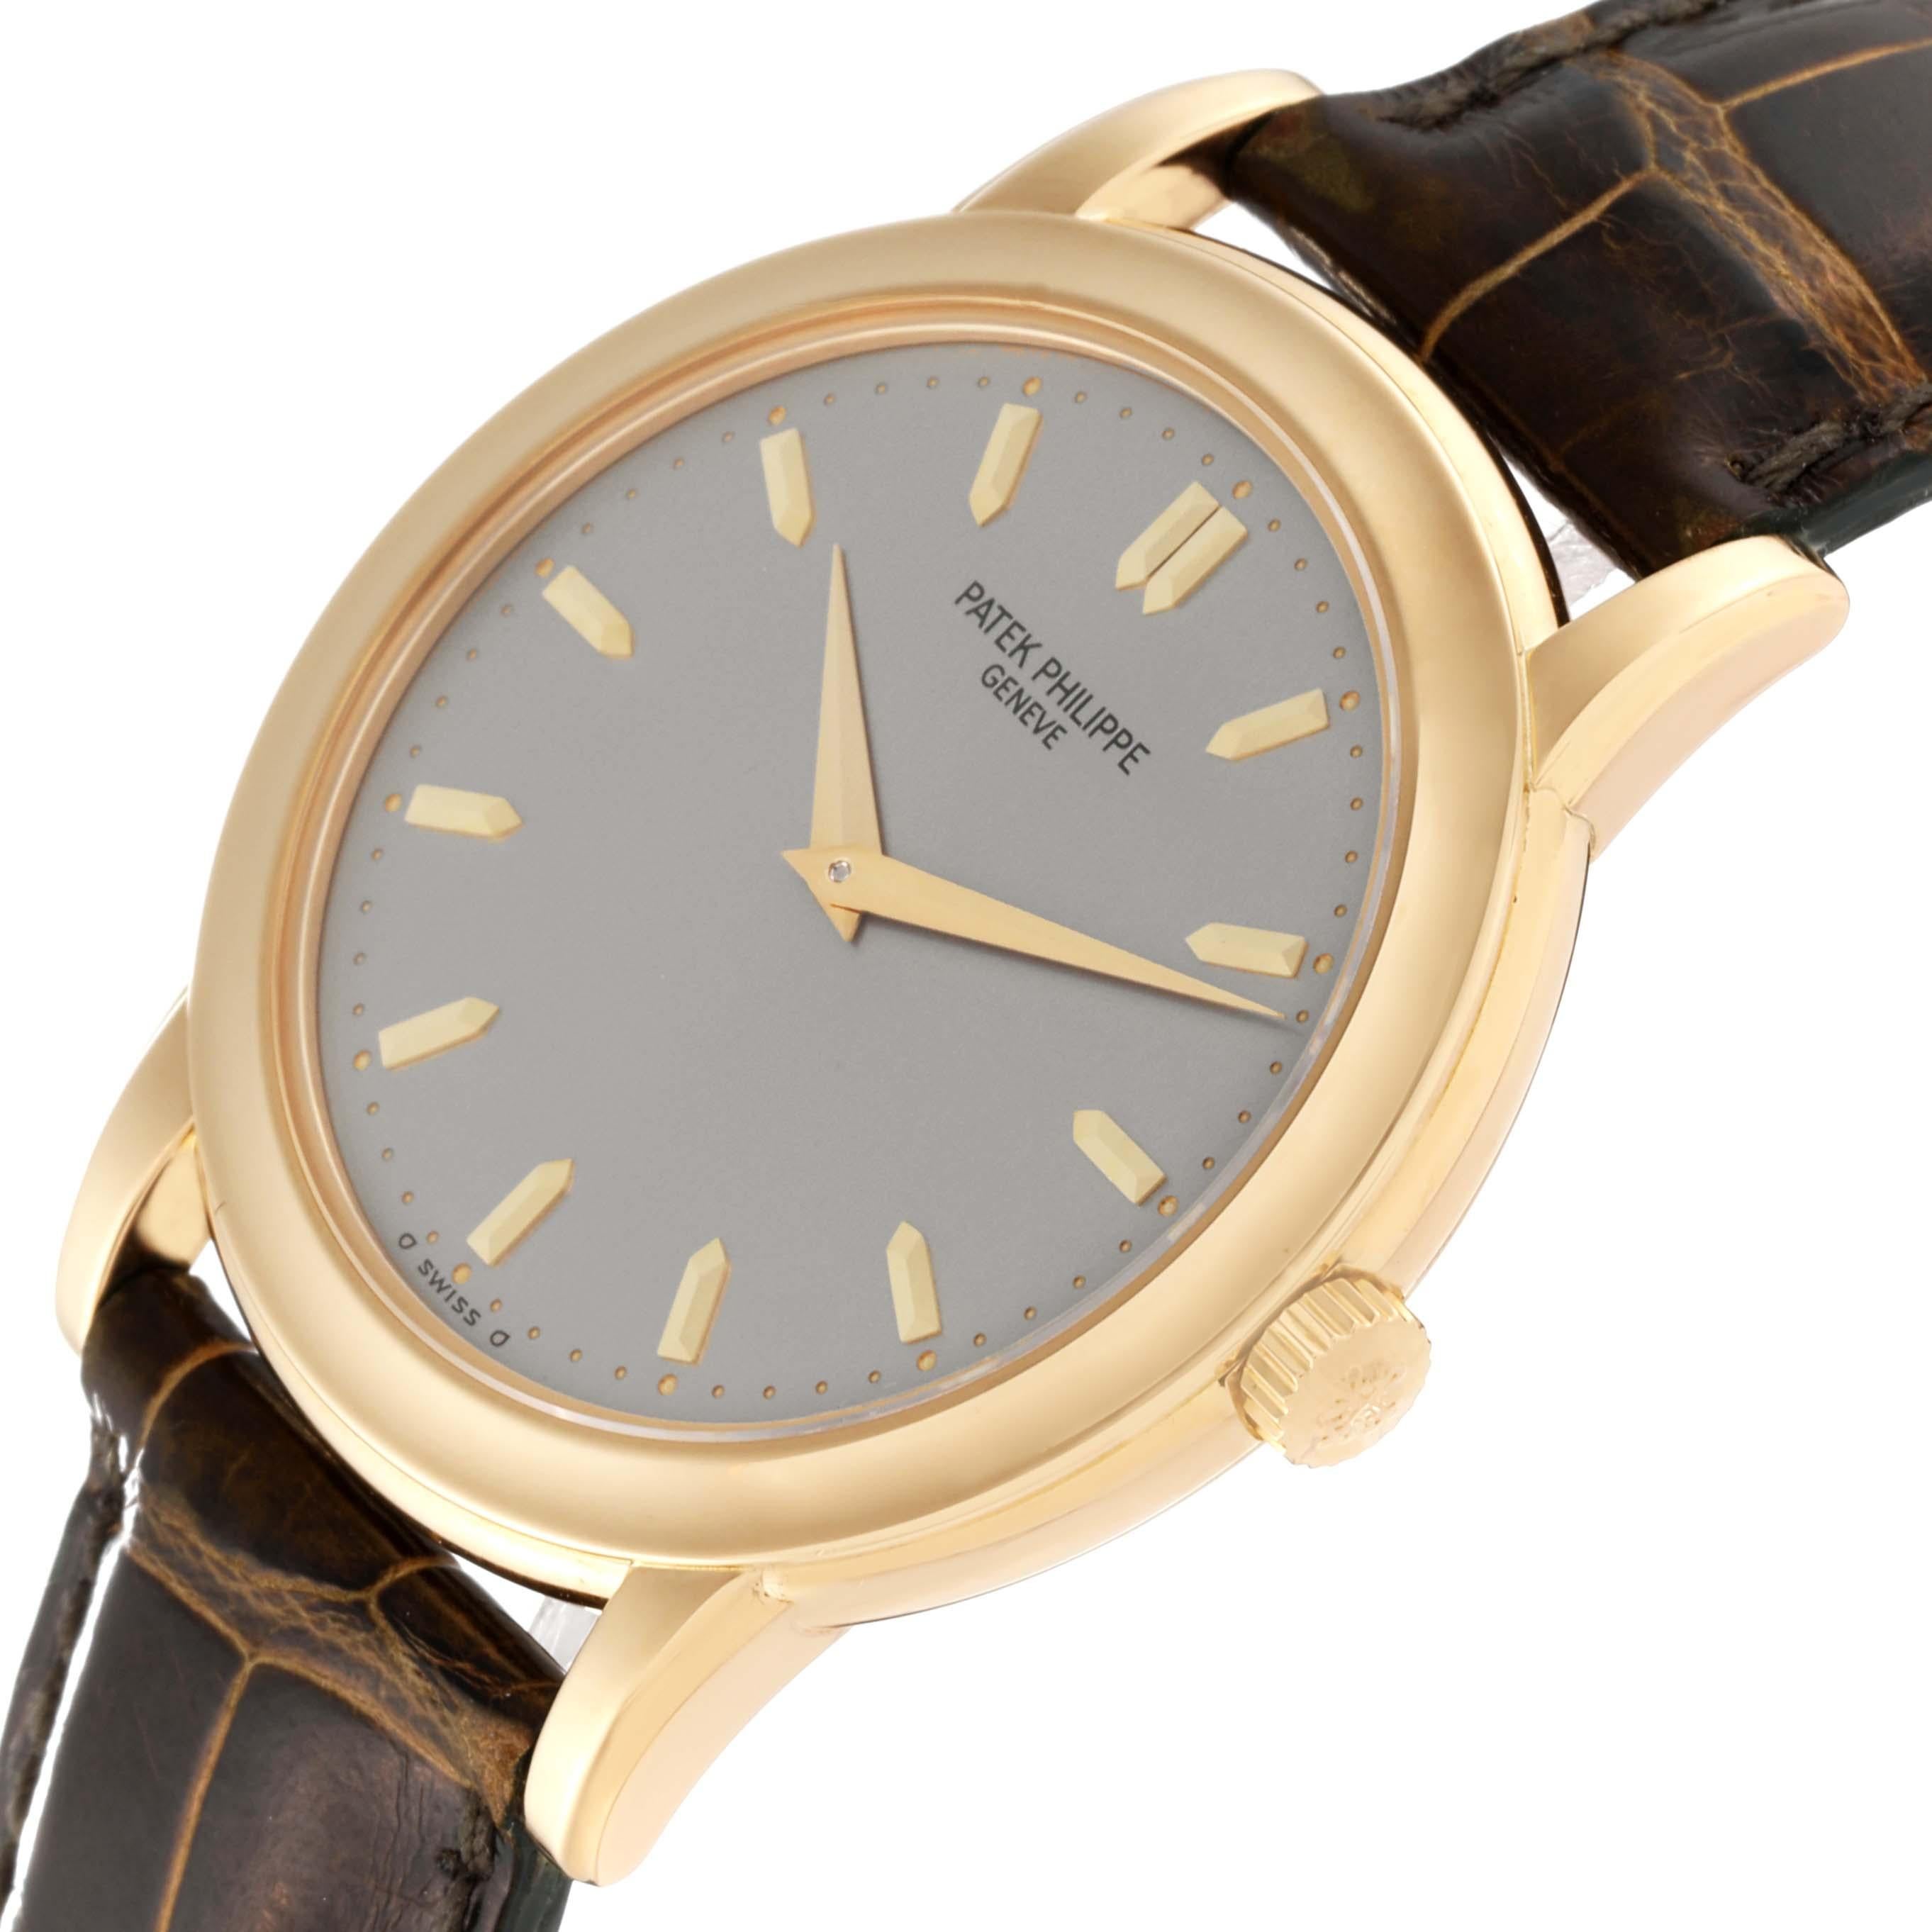 Patek Philippe Calatrava Yellow Gold Silver Dial Mens Watch 5032. Automatic self winding movement. 18k yellow gold case 36.0 mm in diameter. 18k yellow gold bezel. Scratch resistant sapphire crystal. Silver opaline dial with faceted yellow gold